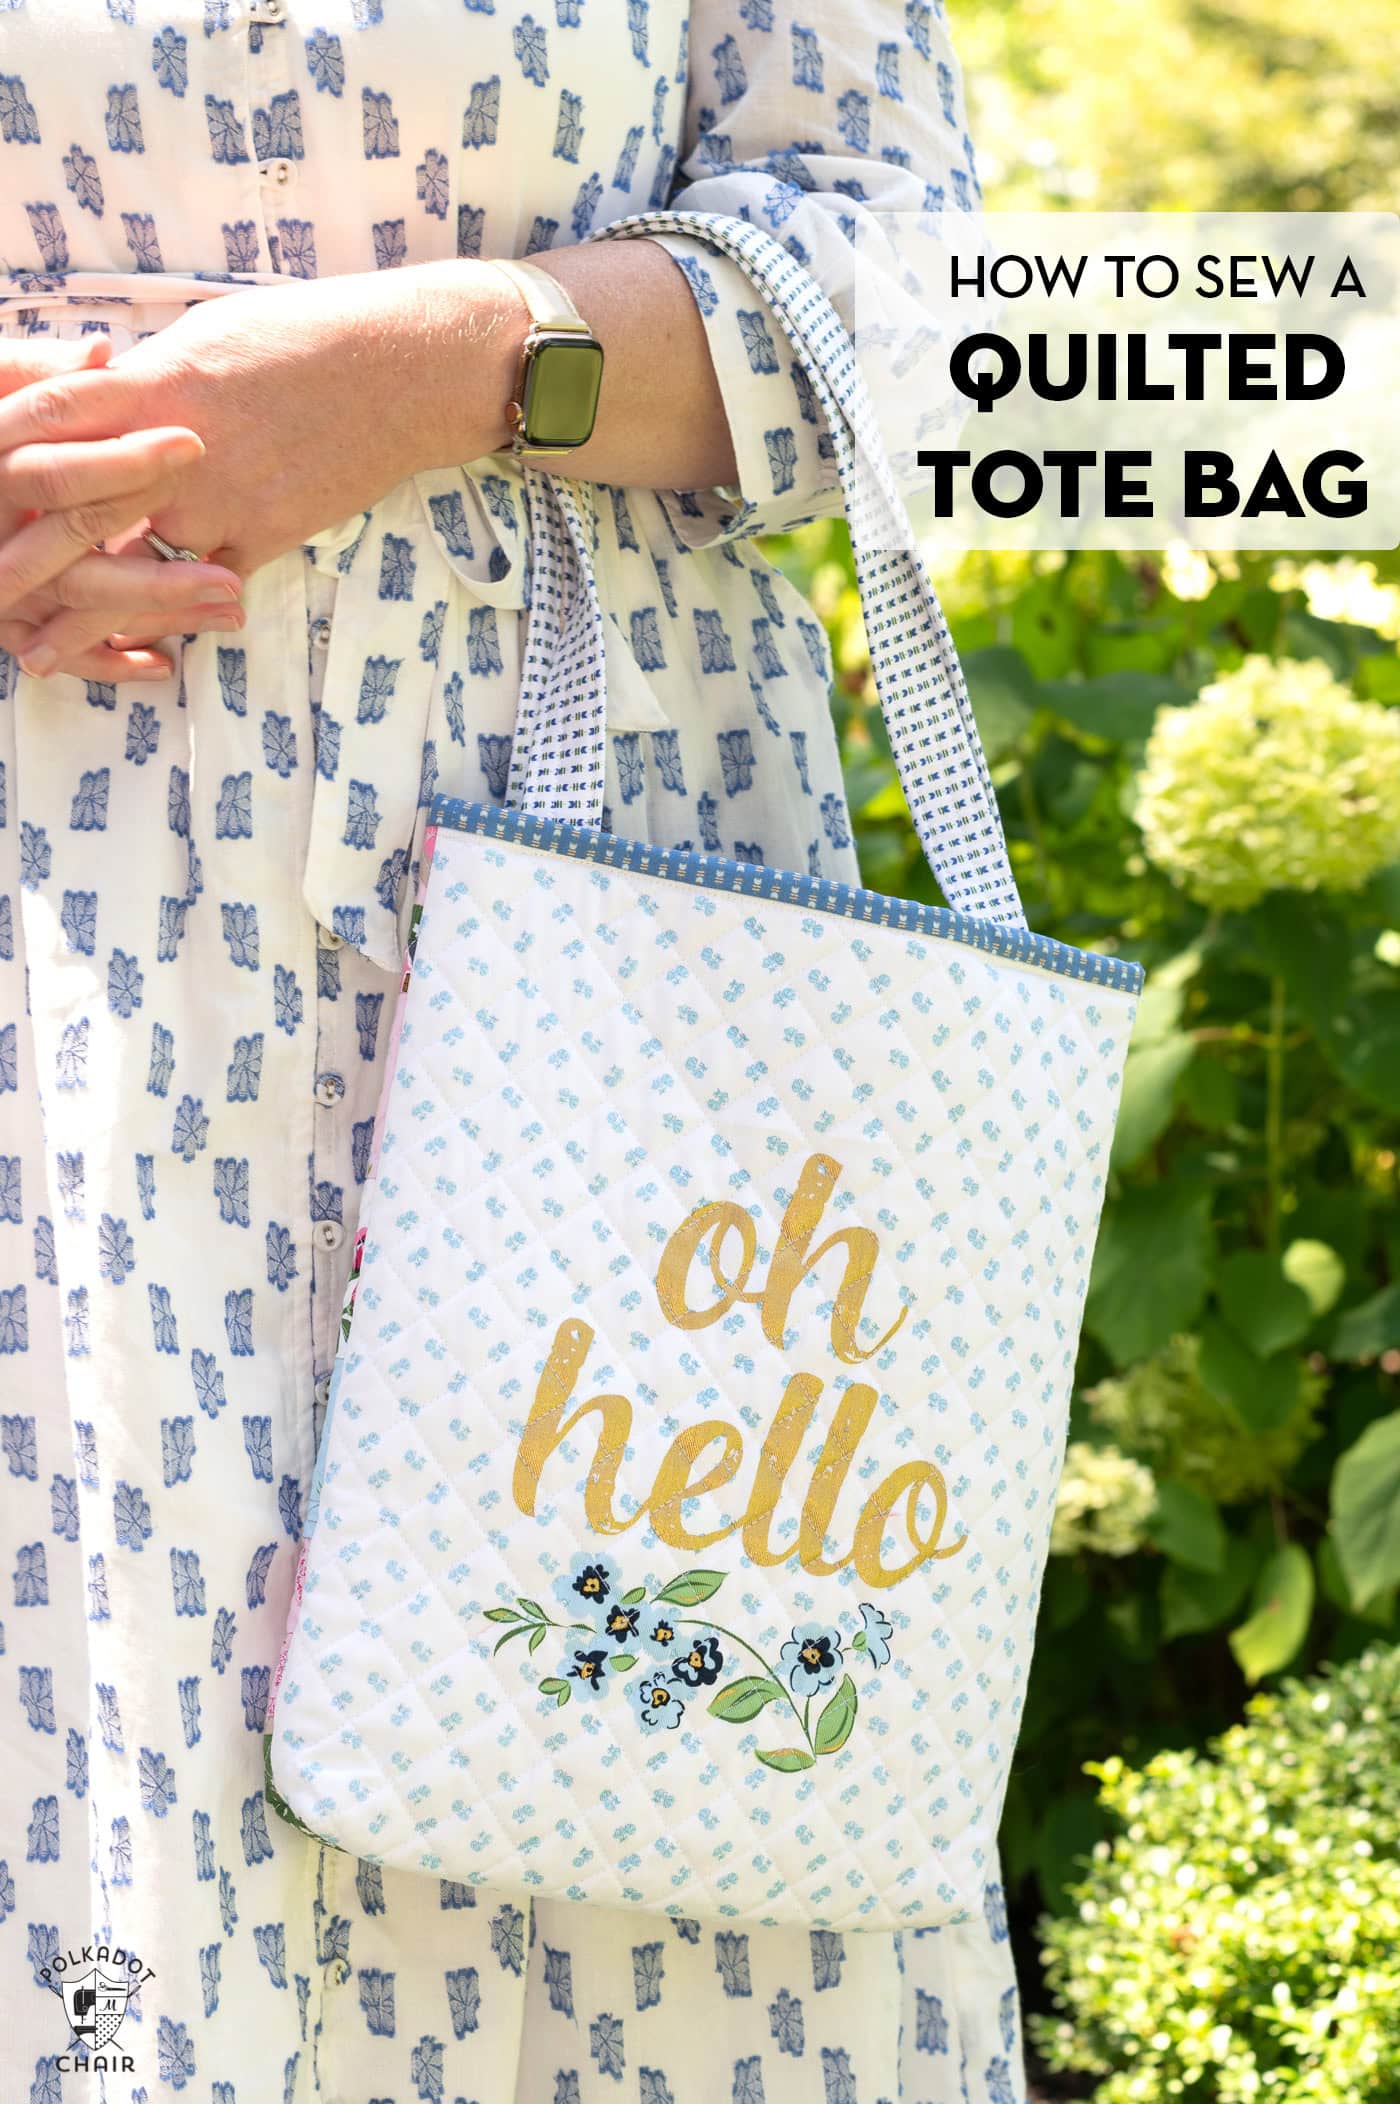 How to Sew a Quilted Tote Bag that’s Perfect for Spring!